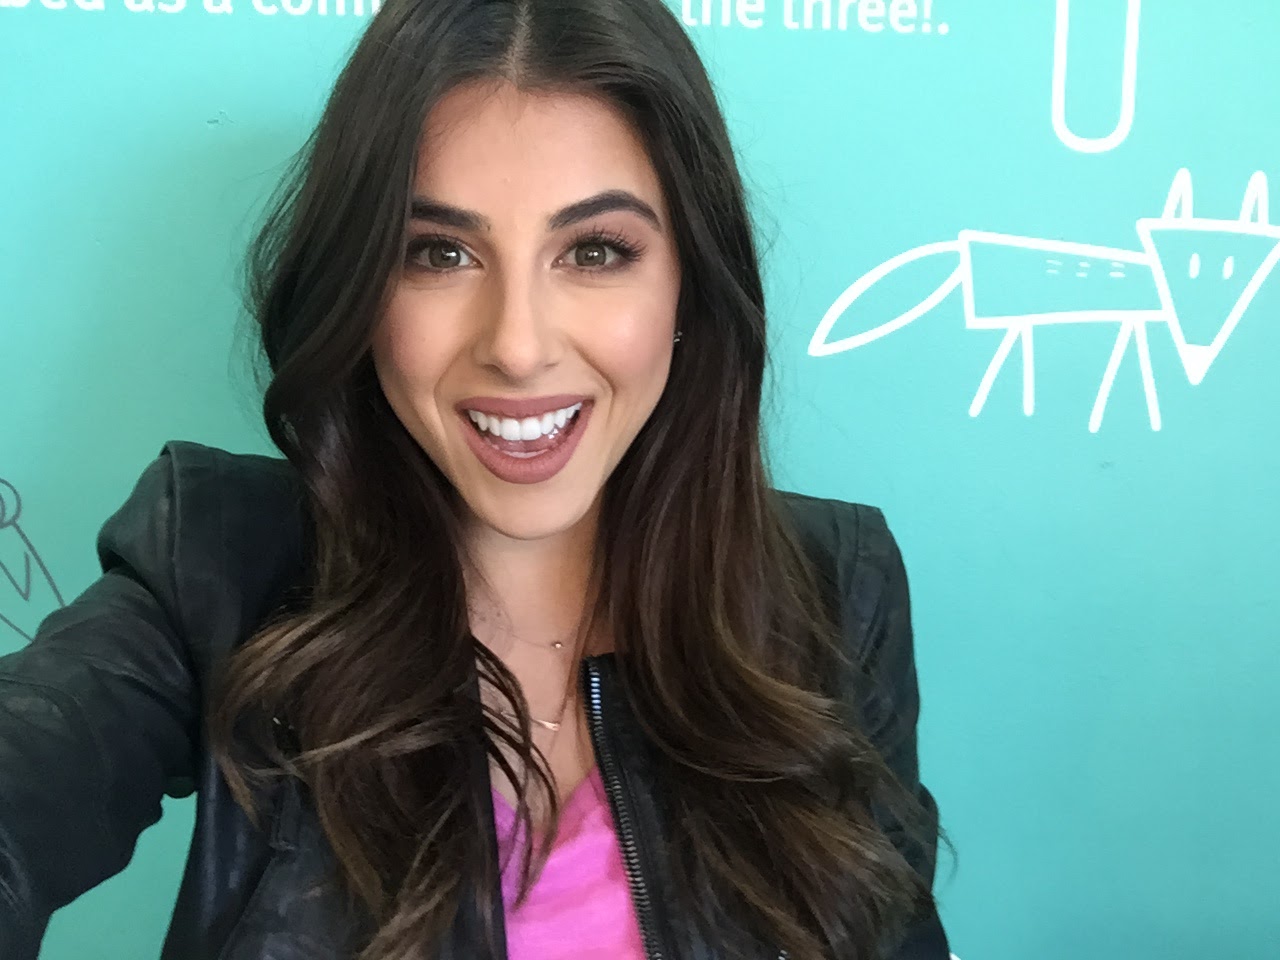 NickALive!: Nickelodeon USA Premieres New Competition Series, Paradise Run,  Set In Hawaii And Hosted By Daniella Monet, Monday, Feb. 1 At 7pm (ET/PT)